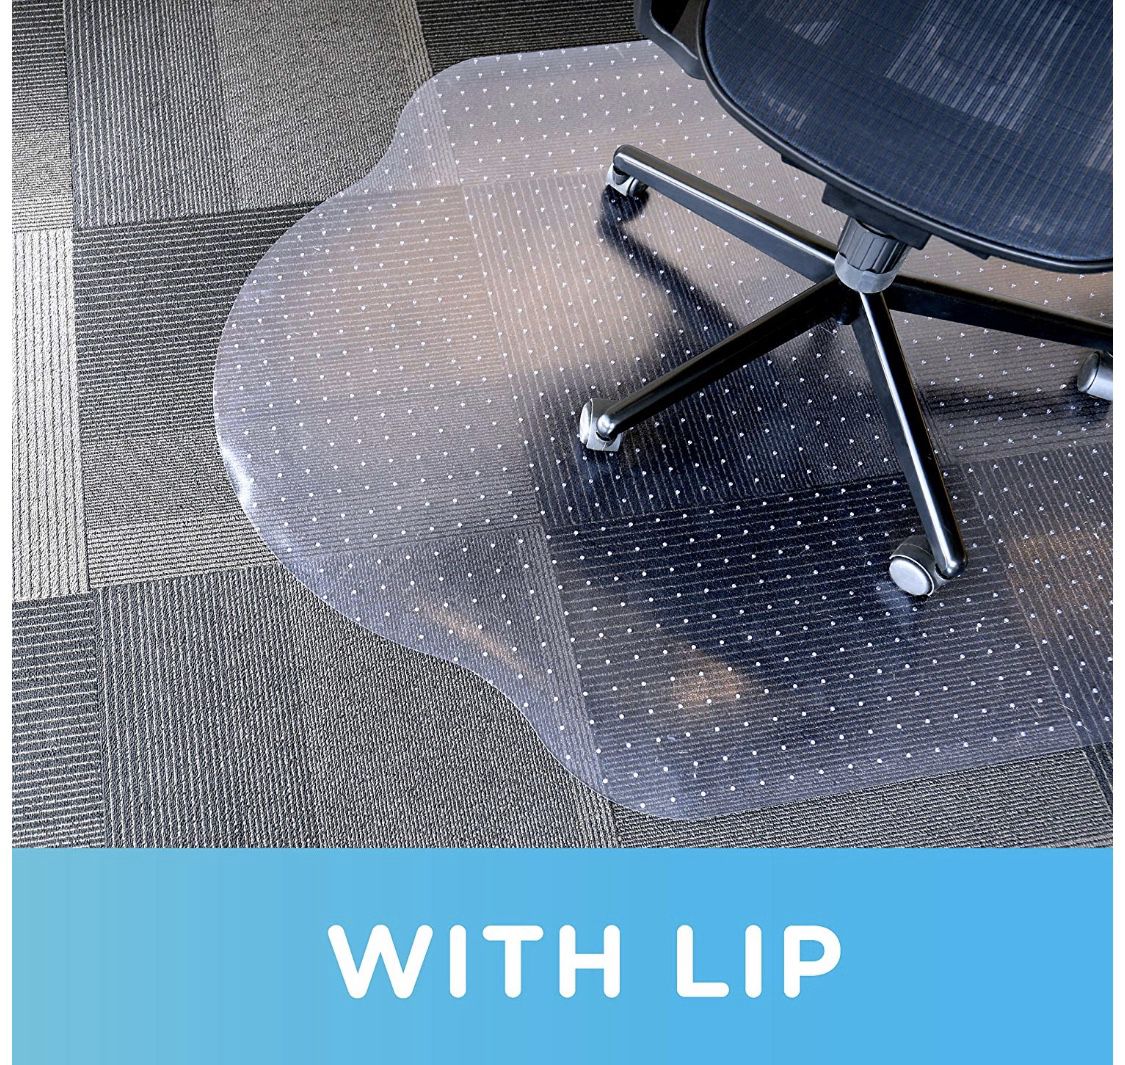 Modern Shape 33"x 44" Clear Office Chair Mat with Lip for Low Pile Carpet, Made in The USA by Dimex, Phthalate Free